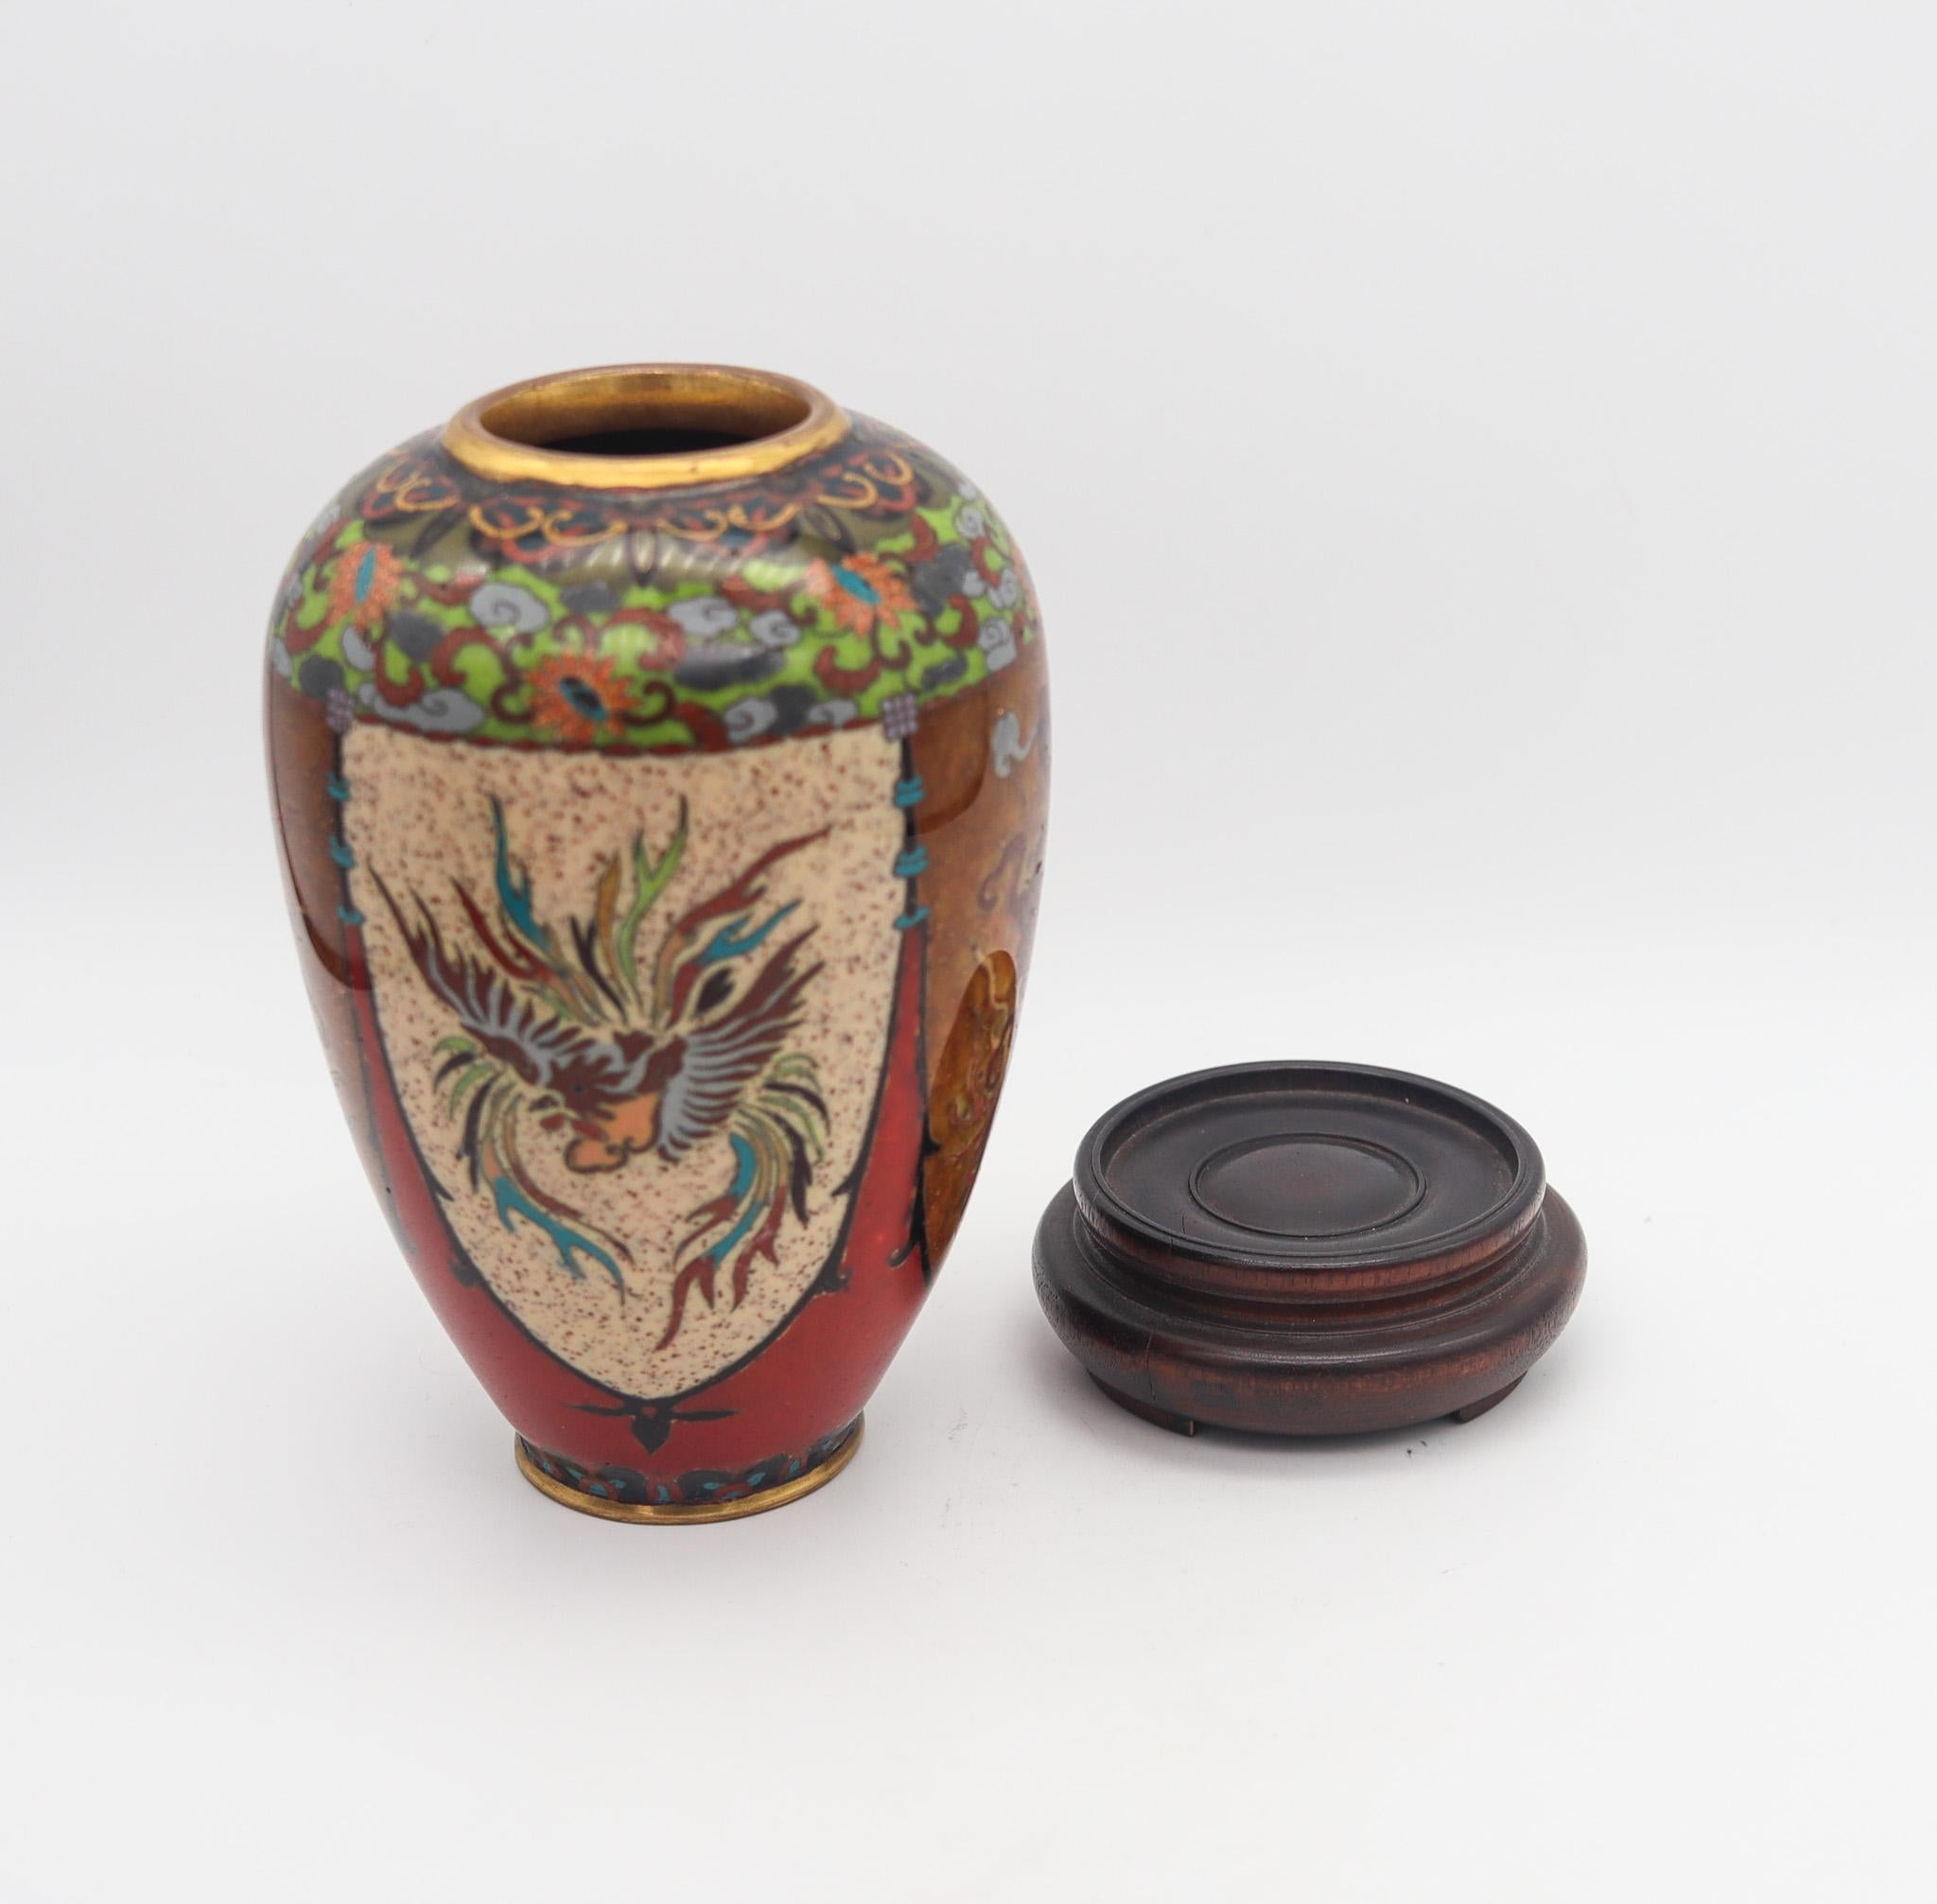 Japanese vase from the Meiji Period (1868-1912).

Beautiful antique decorative vase, created in Japan during the Meiji period (1868-1912), circa 1890s. It was carefully crafted in solid bronze with copper wires and embellished with applications of